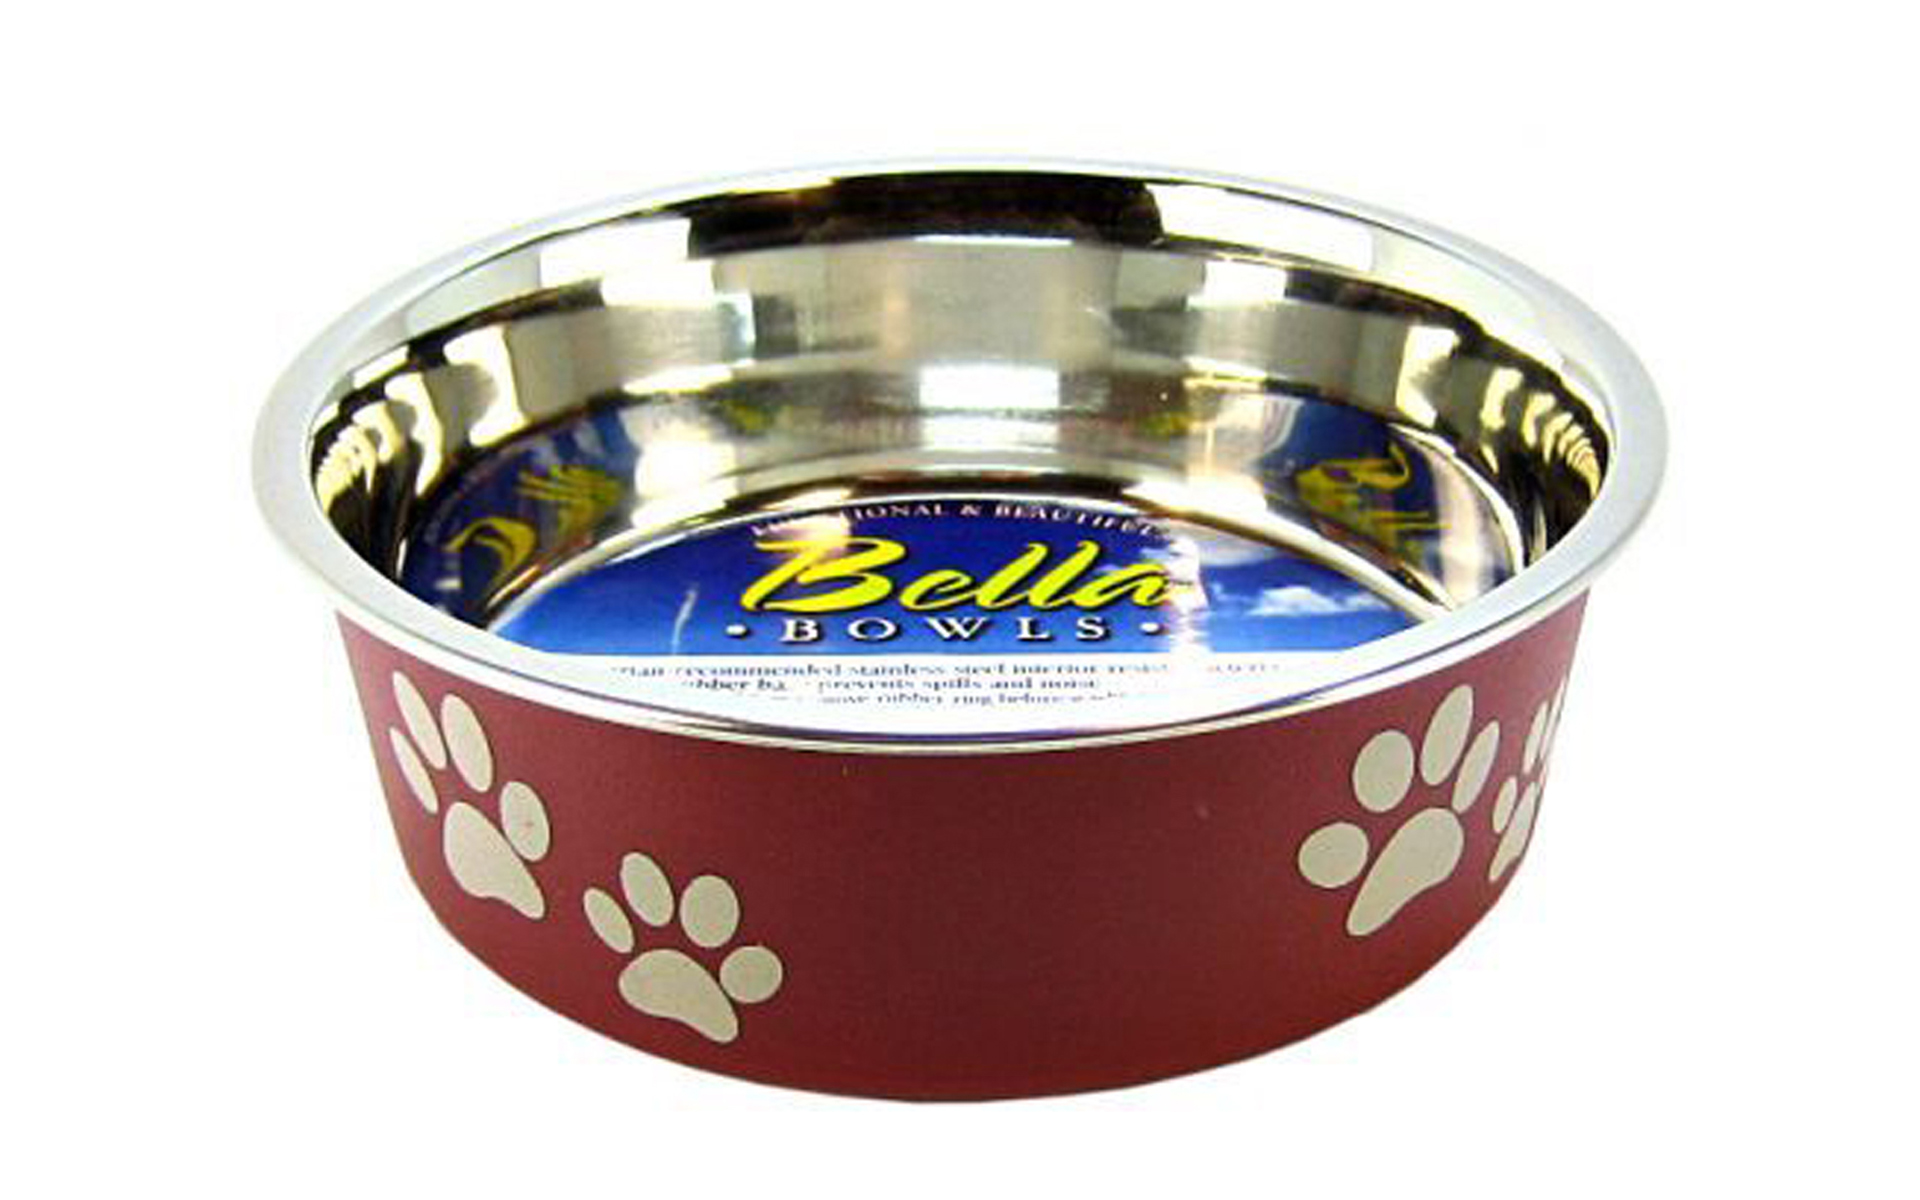 Stainless Steel & Merlot Dish with Rubber Base, M